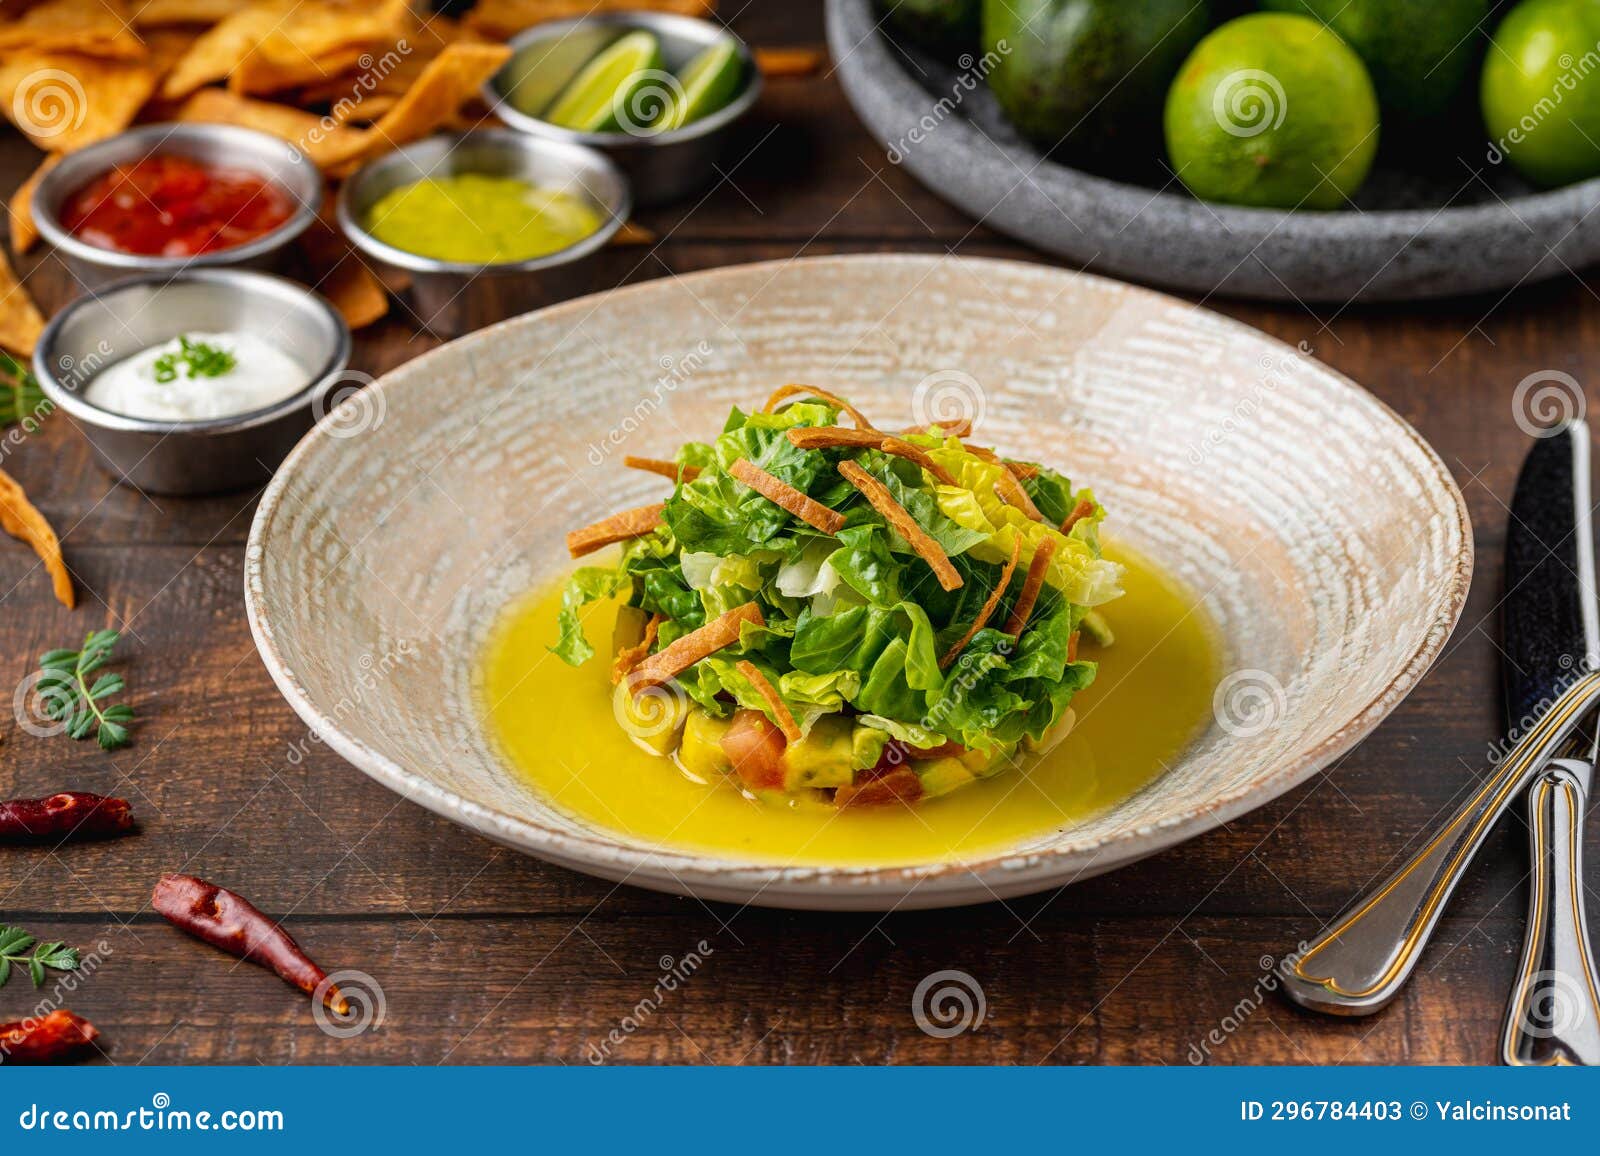 ensalada de aguacate with various sauces on wooden table